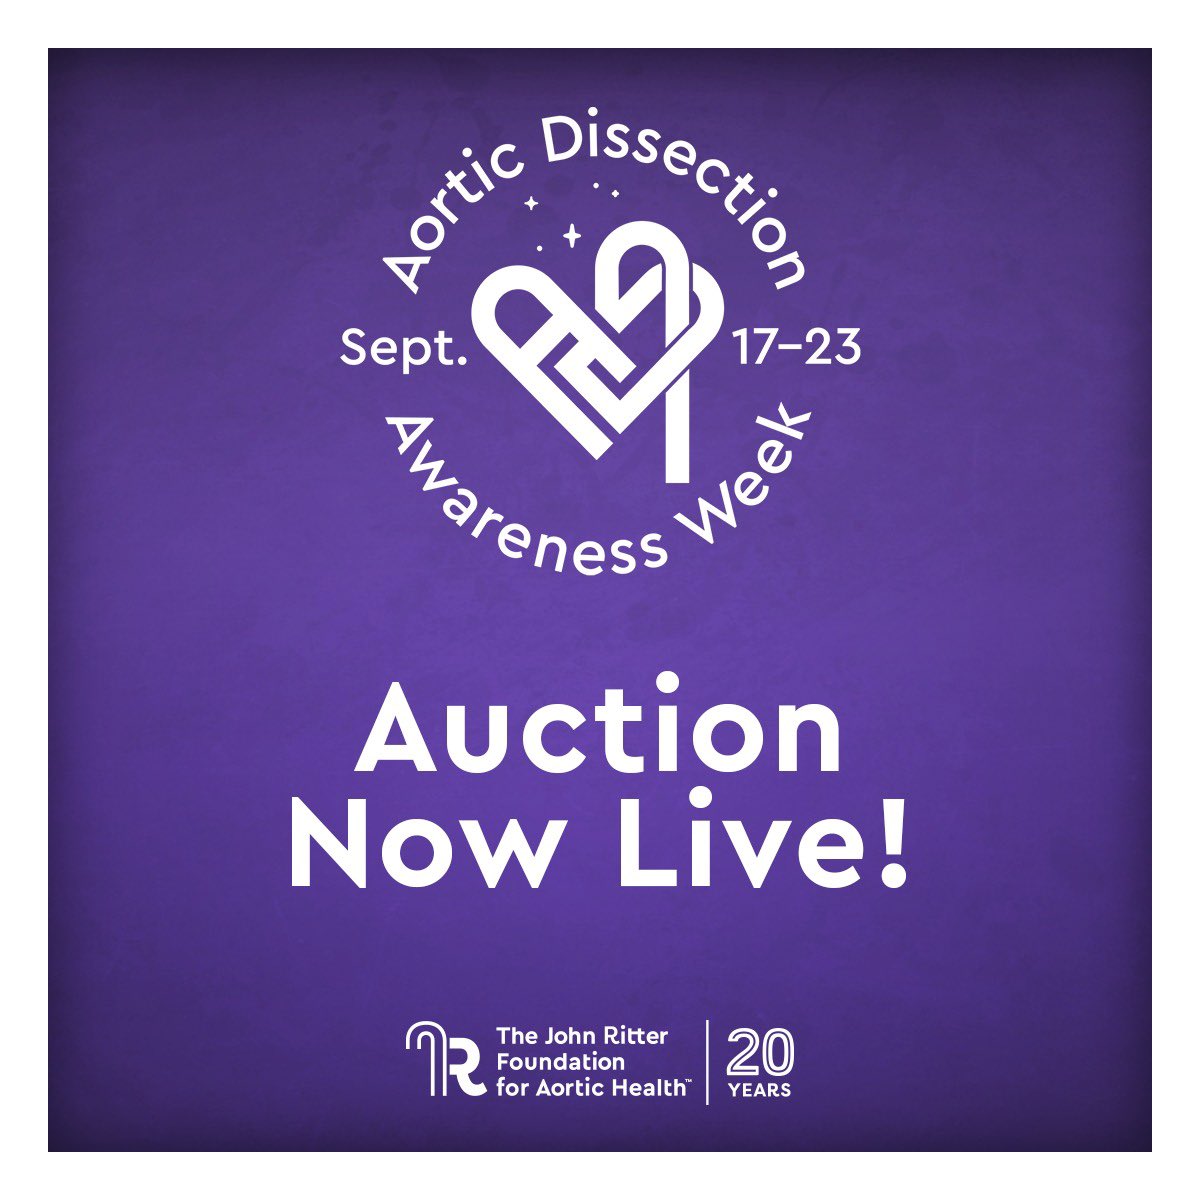 Aortic Dissection Awareness Week is almost over!! Have you checked out the virtual auction where you can get awesome memorabilia, gift certificates, and more stuff and other things plus different items?? It all helps the @JohnRitterFdn Link here: tinyurl.com/bdfn2k86